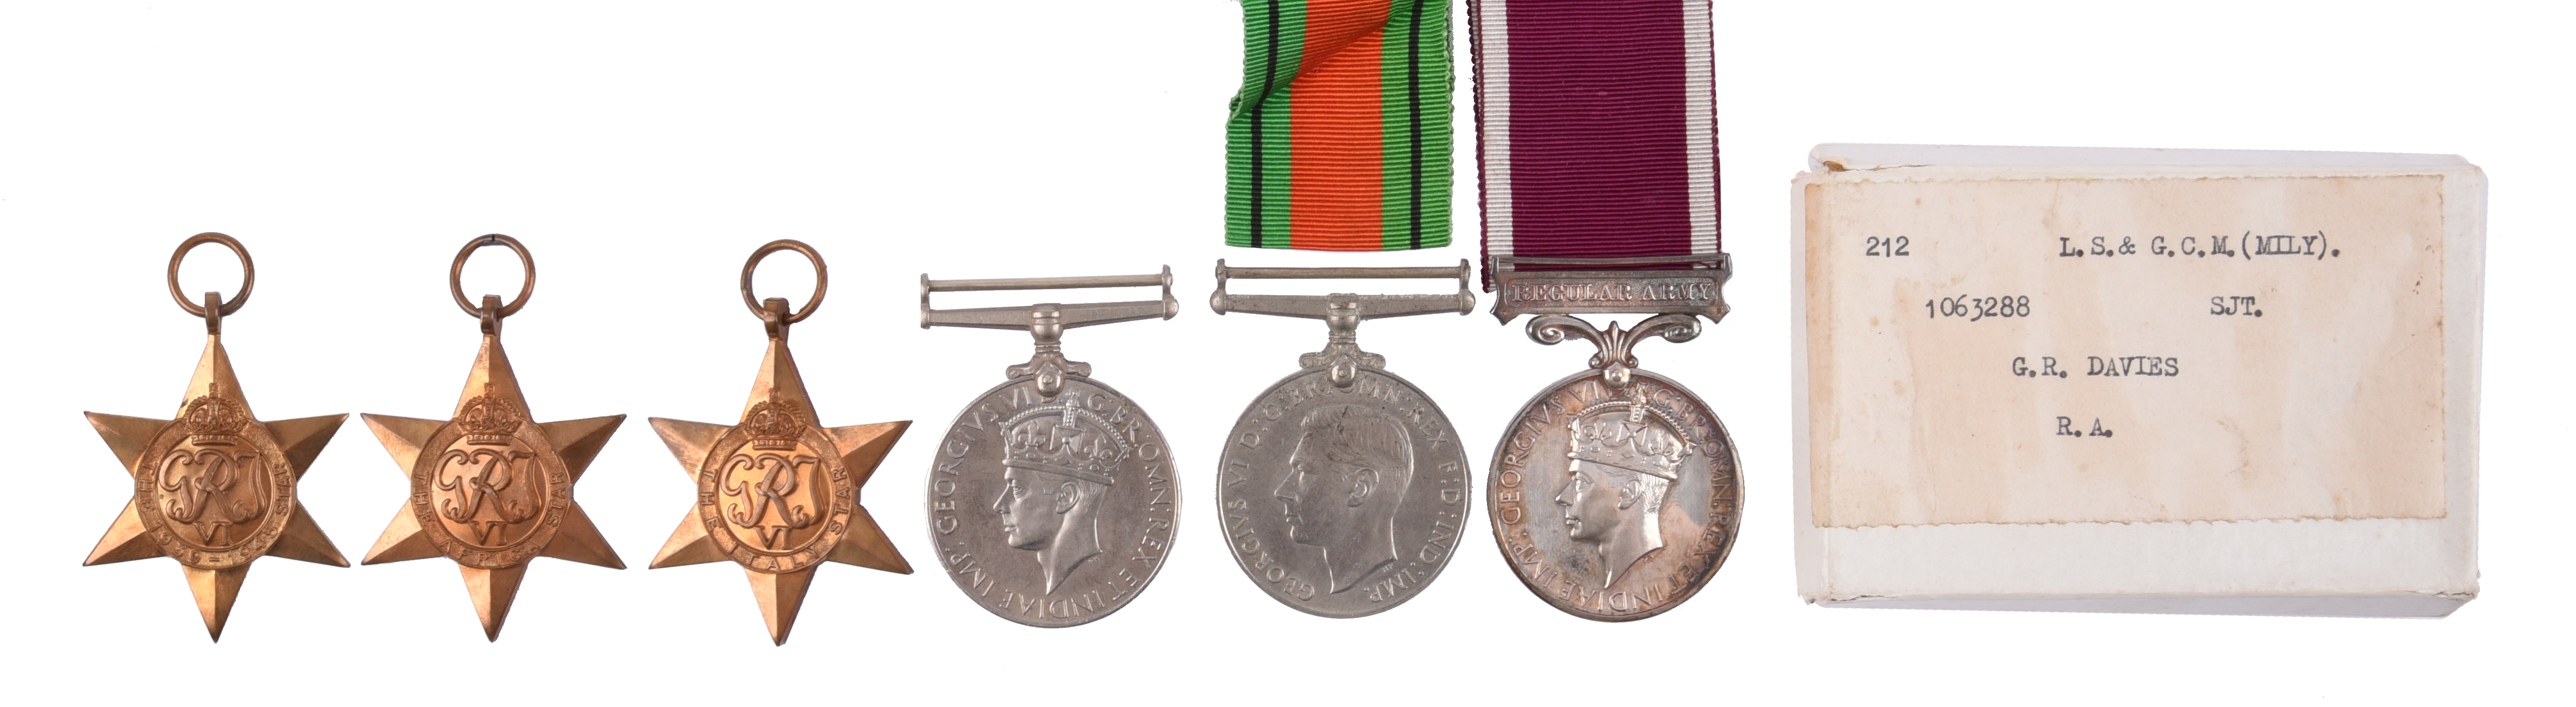 Six medals named or attributed to Sergeant G. R. Davies, Royal Artillery: 1939-45 Star, Africa Star,